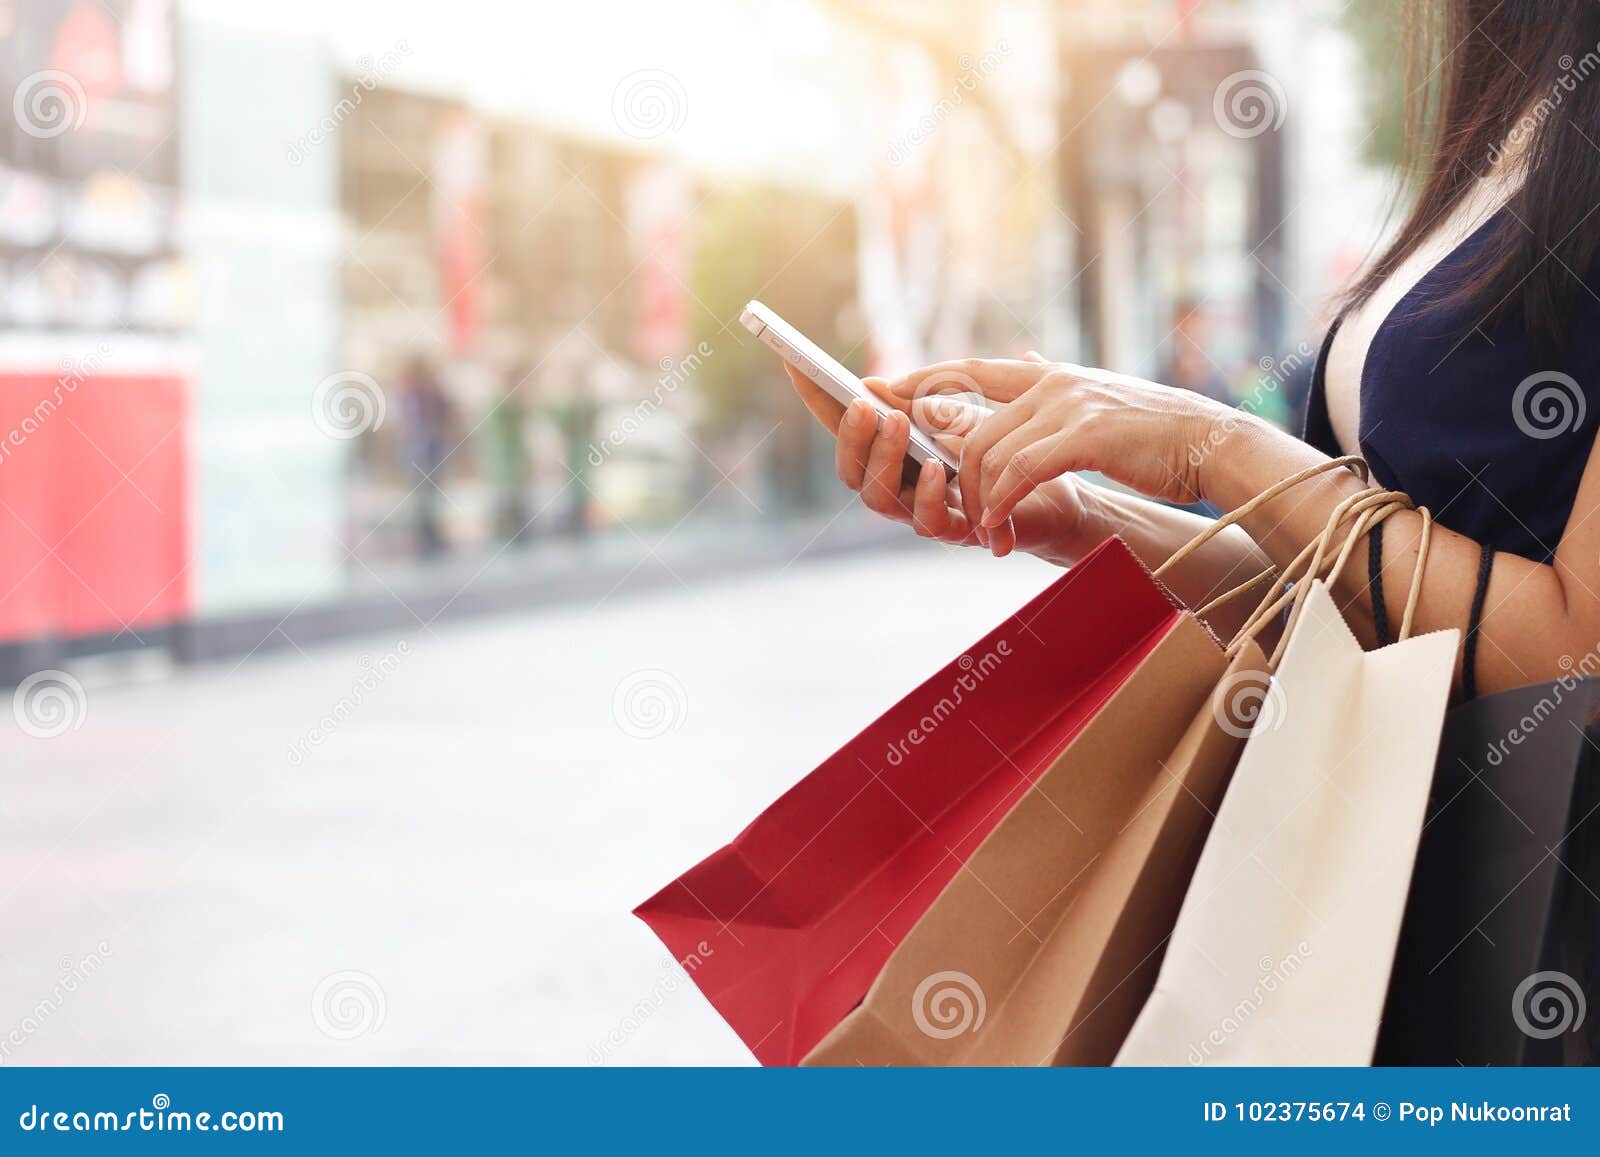 woman using smartphone while holding shopping bags